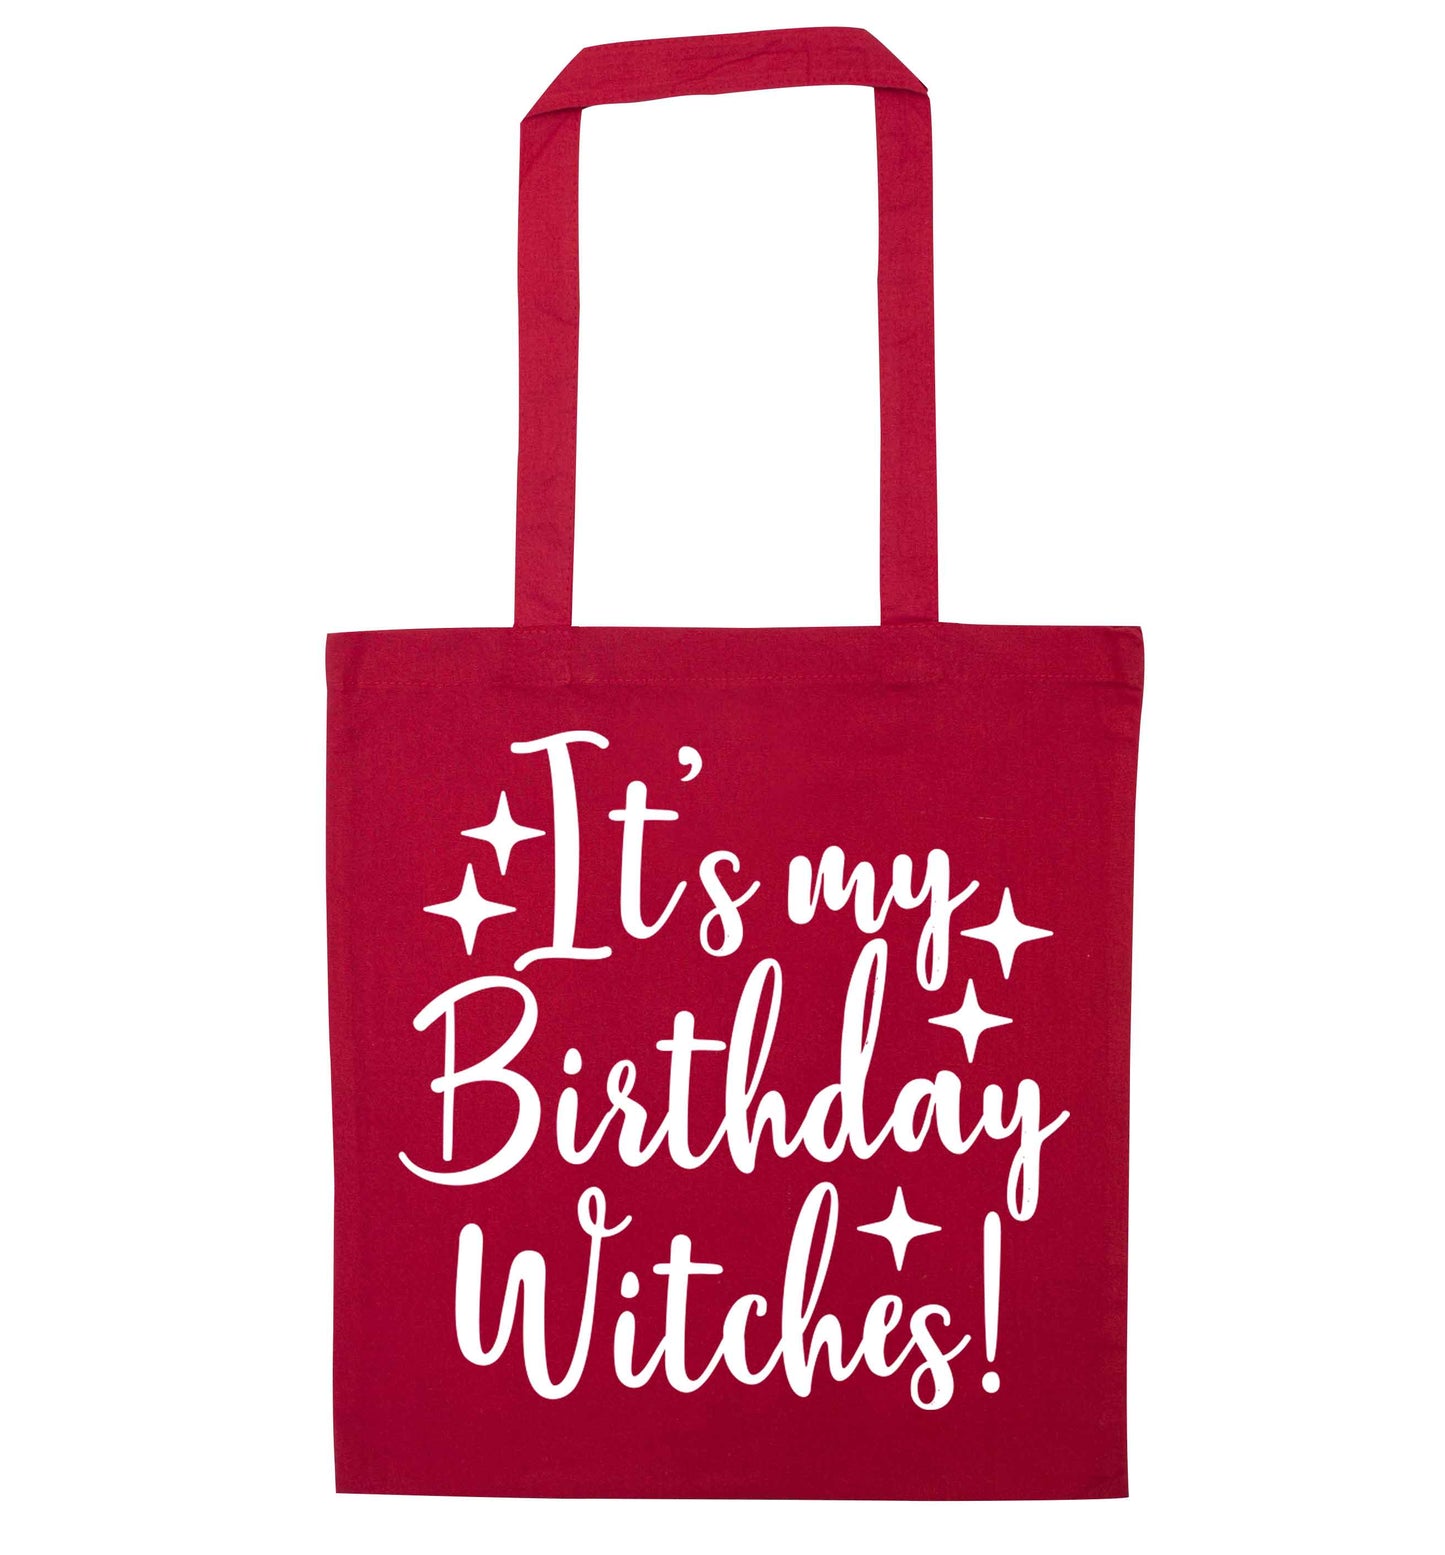 It's my birthday witches!red tote bag